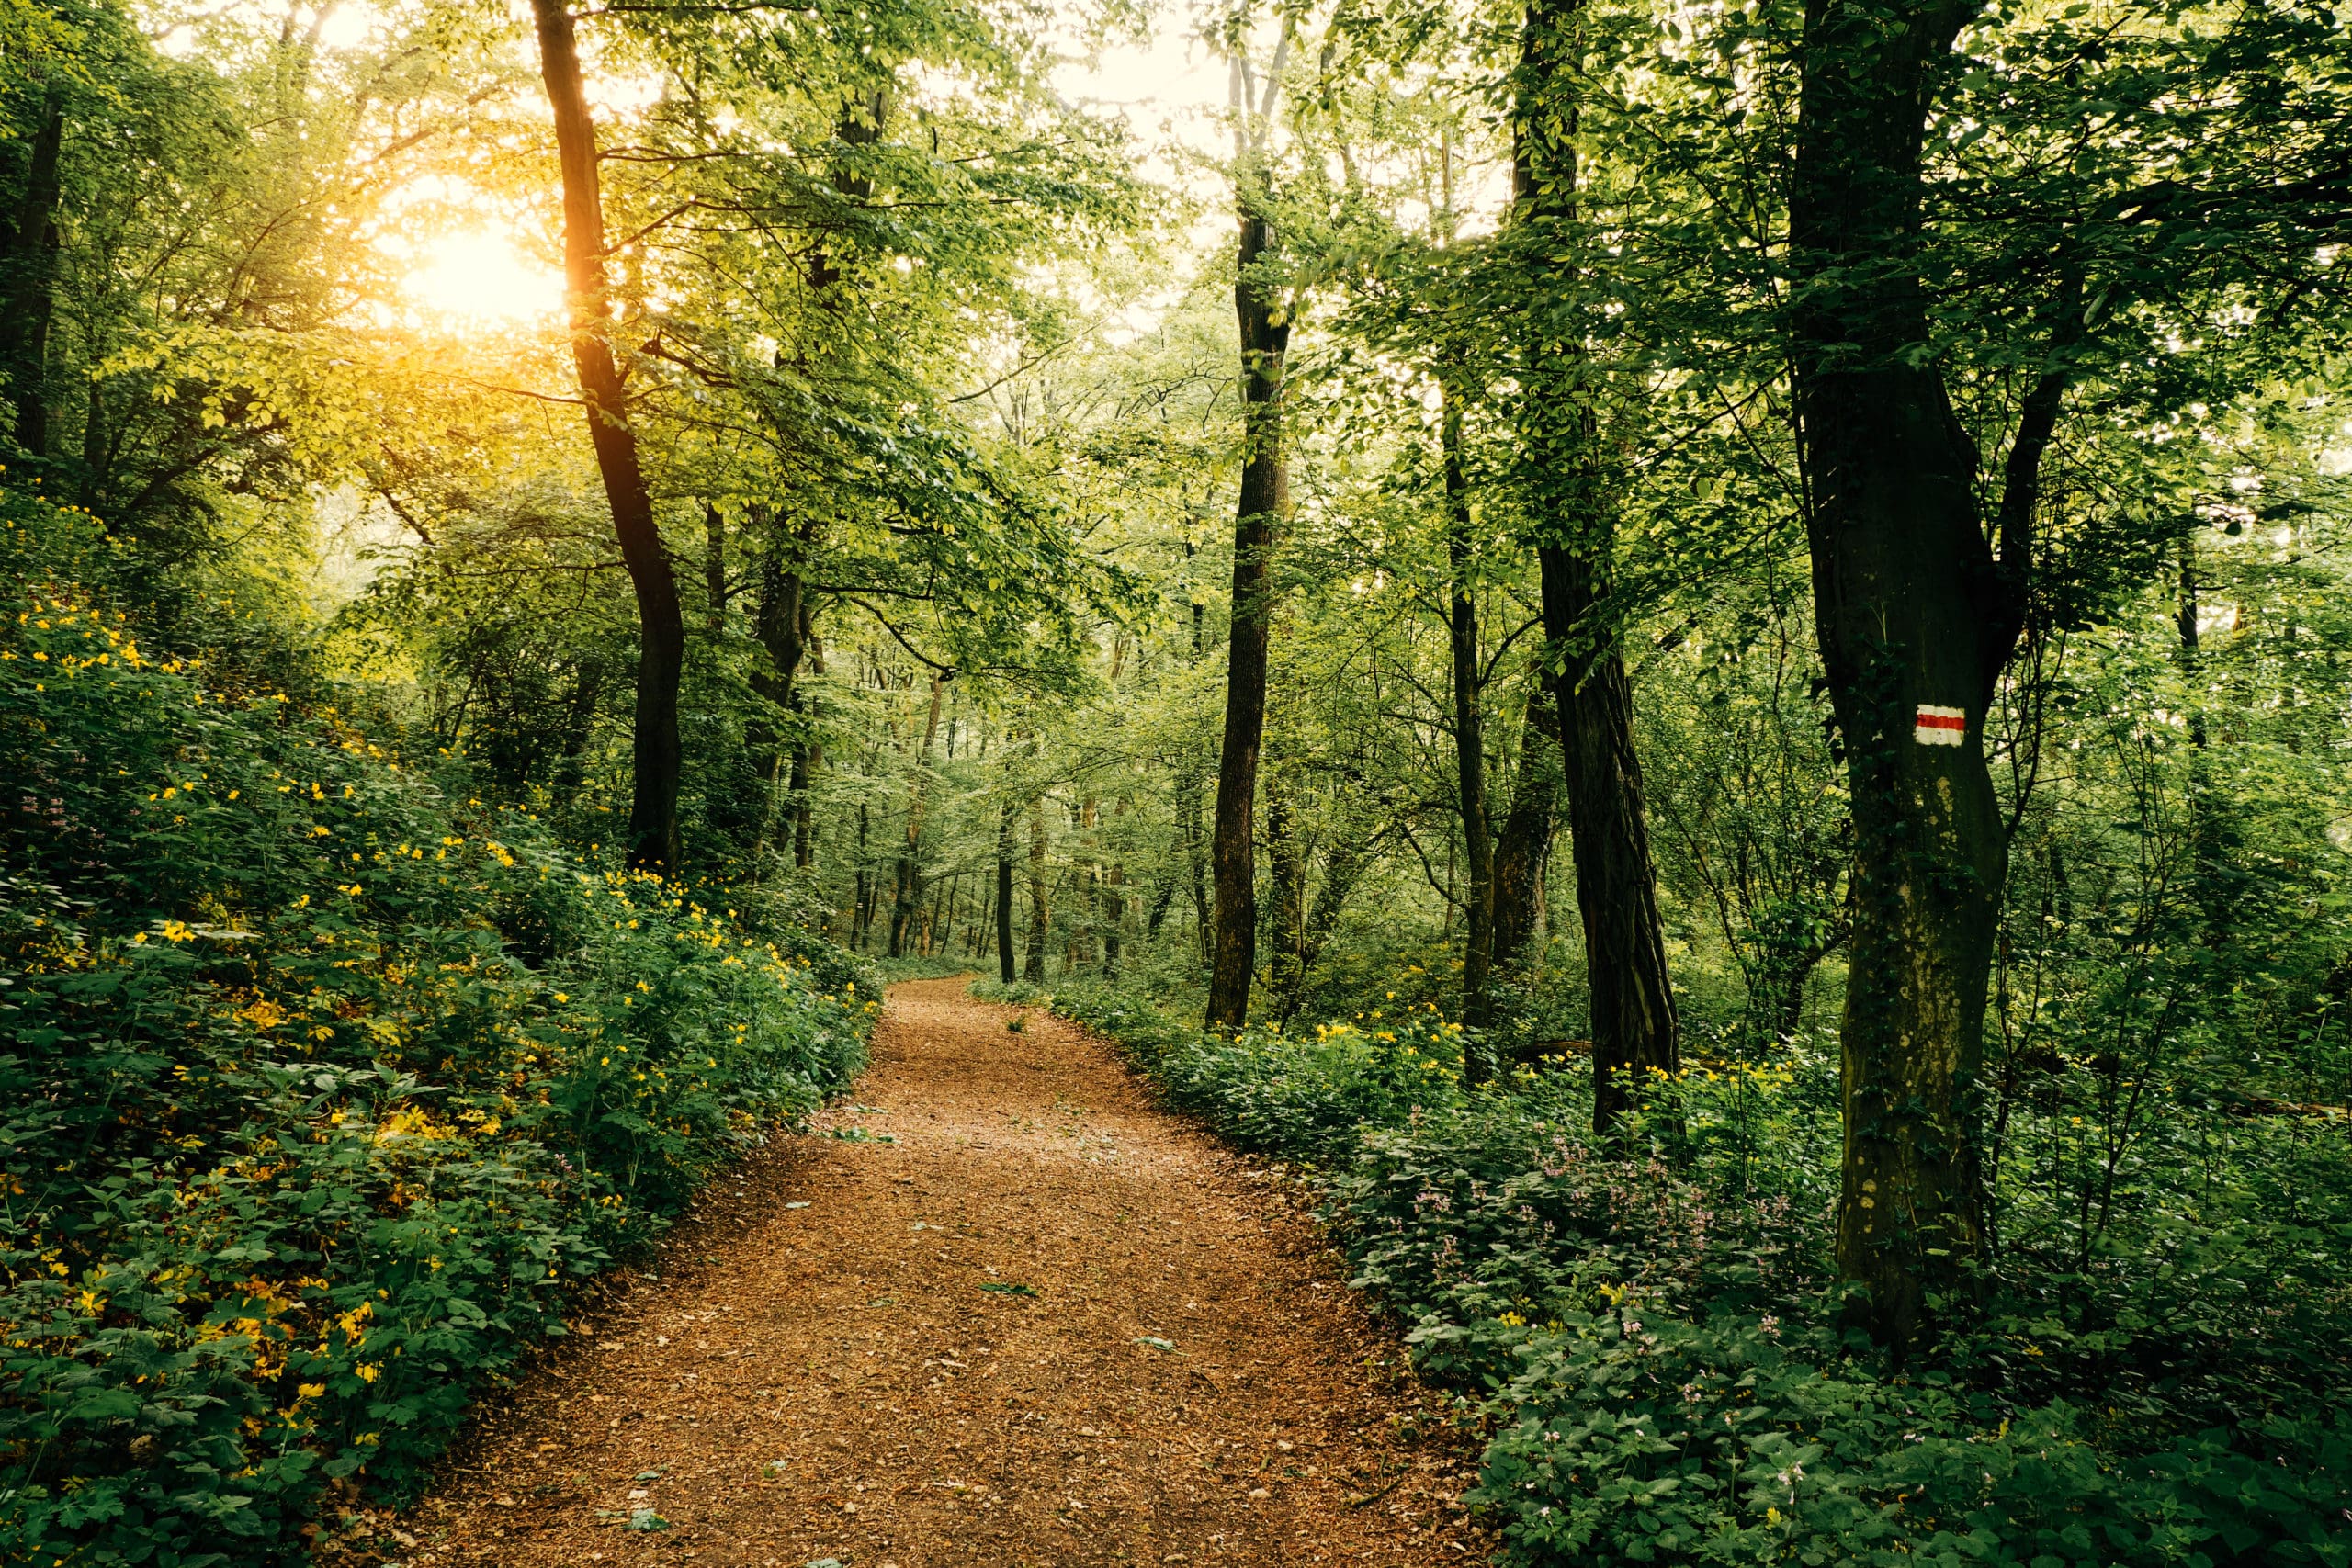 A wooded path with sunlight filtering through the trees